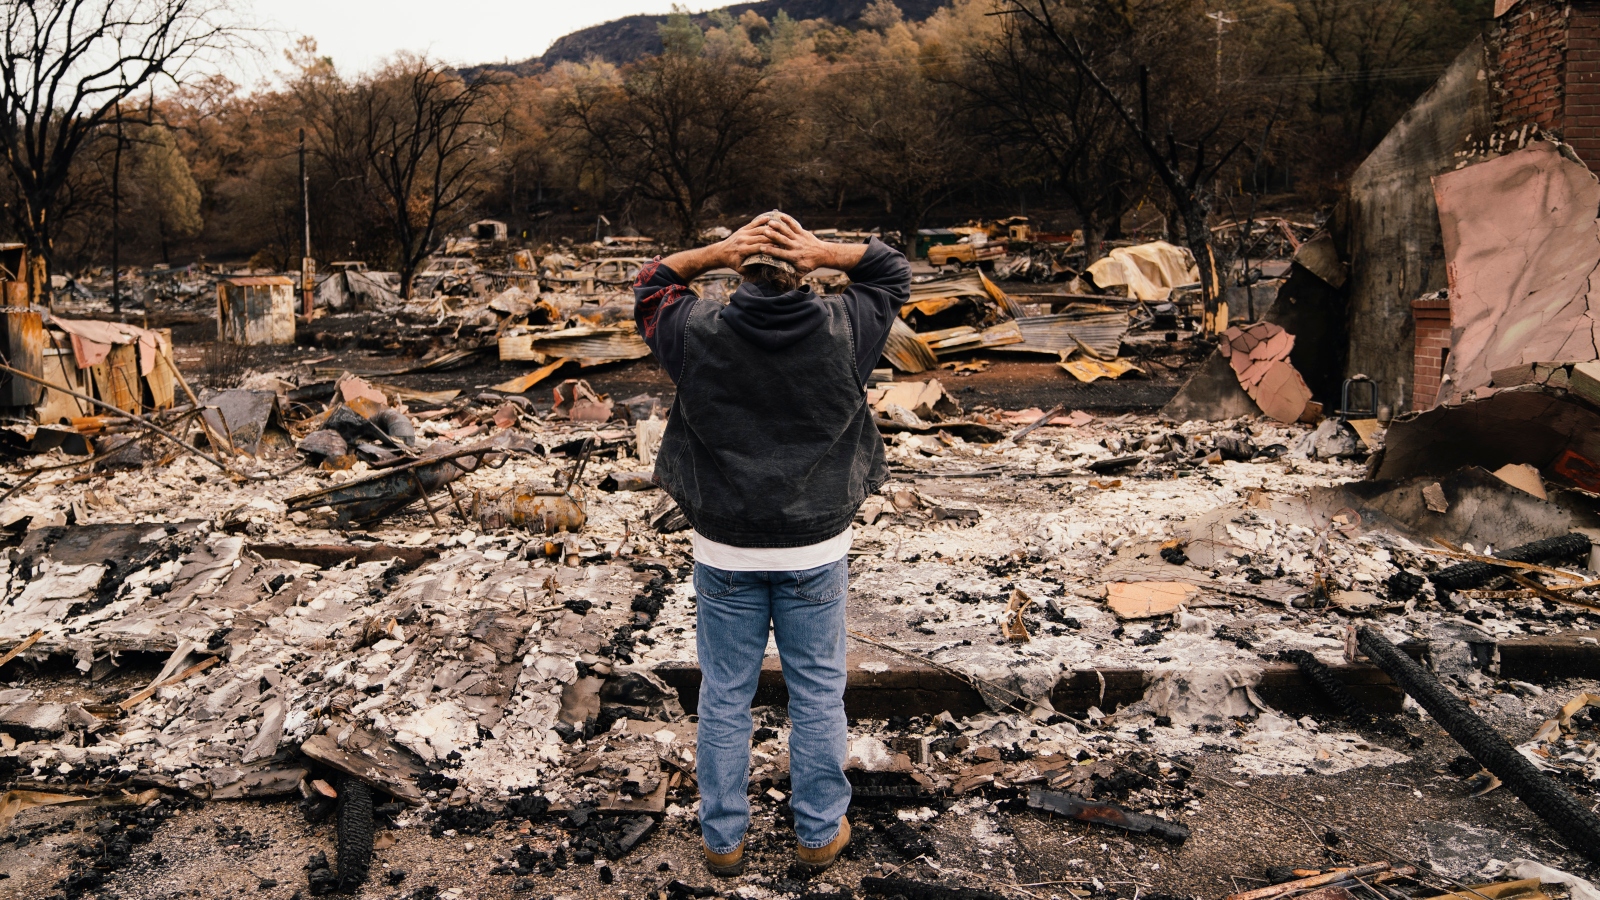 Kevin Ciotta looks over a burned out community center in Chico, California.